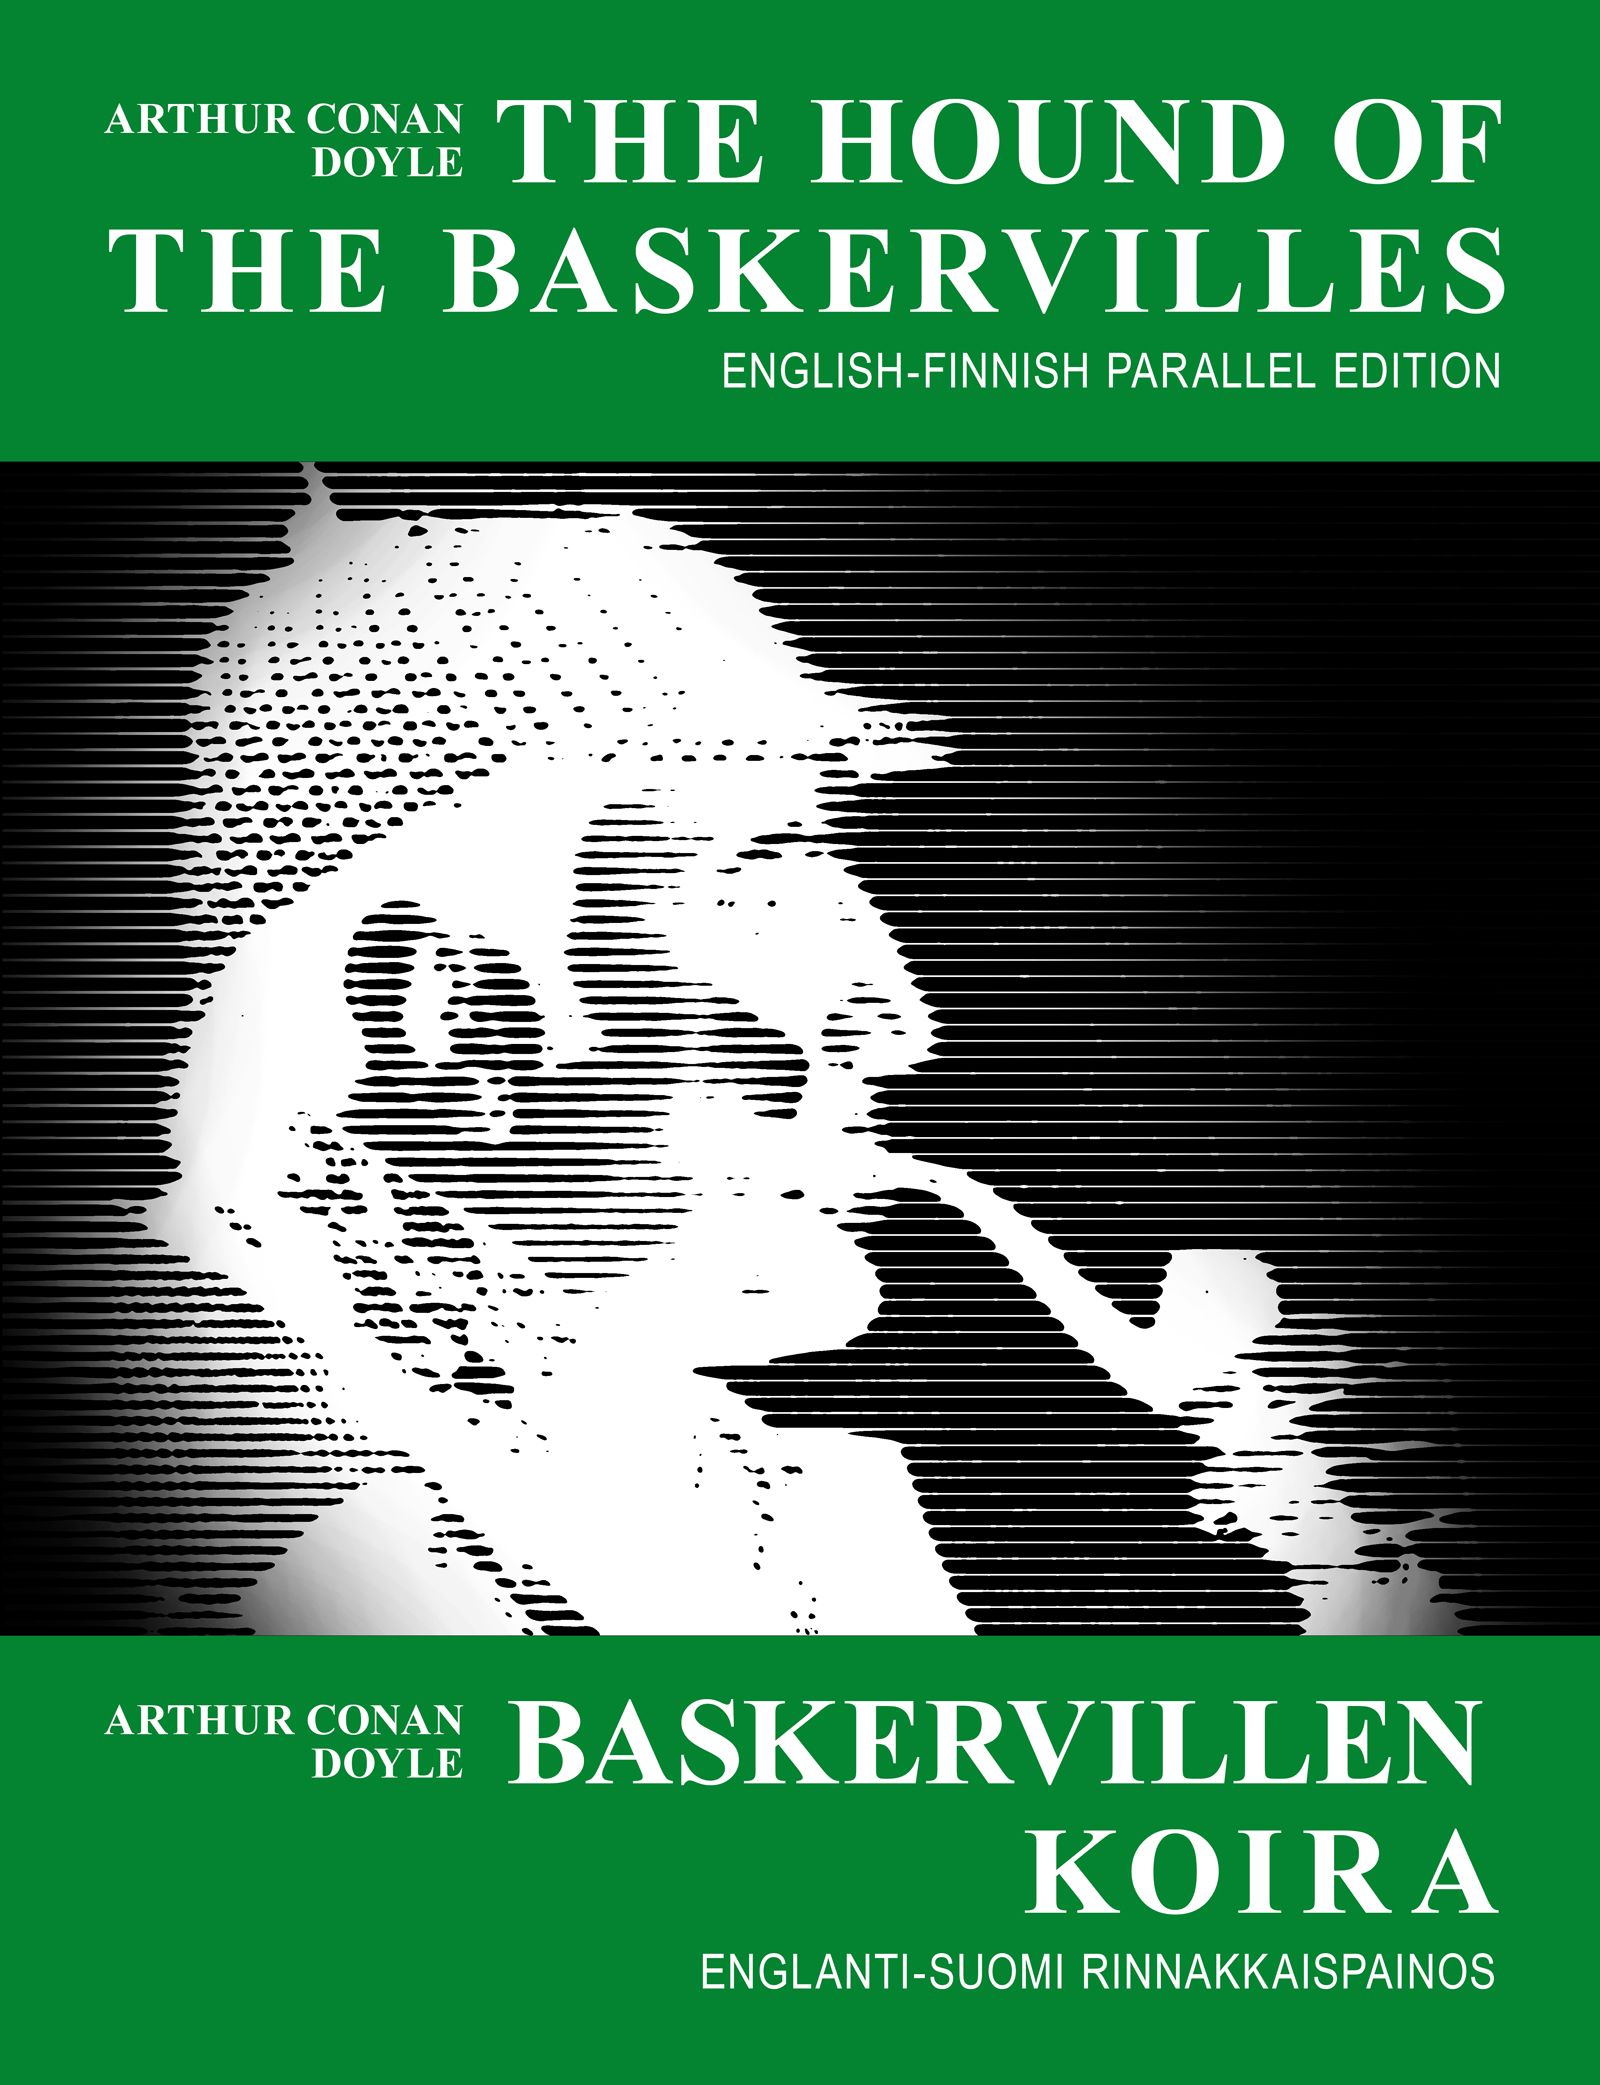 The Hound of the Baskervilles (English-Finnish Parallel Edition with Illustrations)'s Book Image